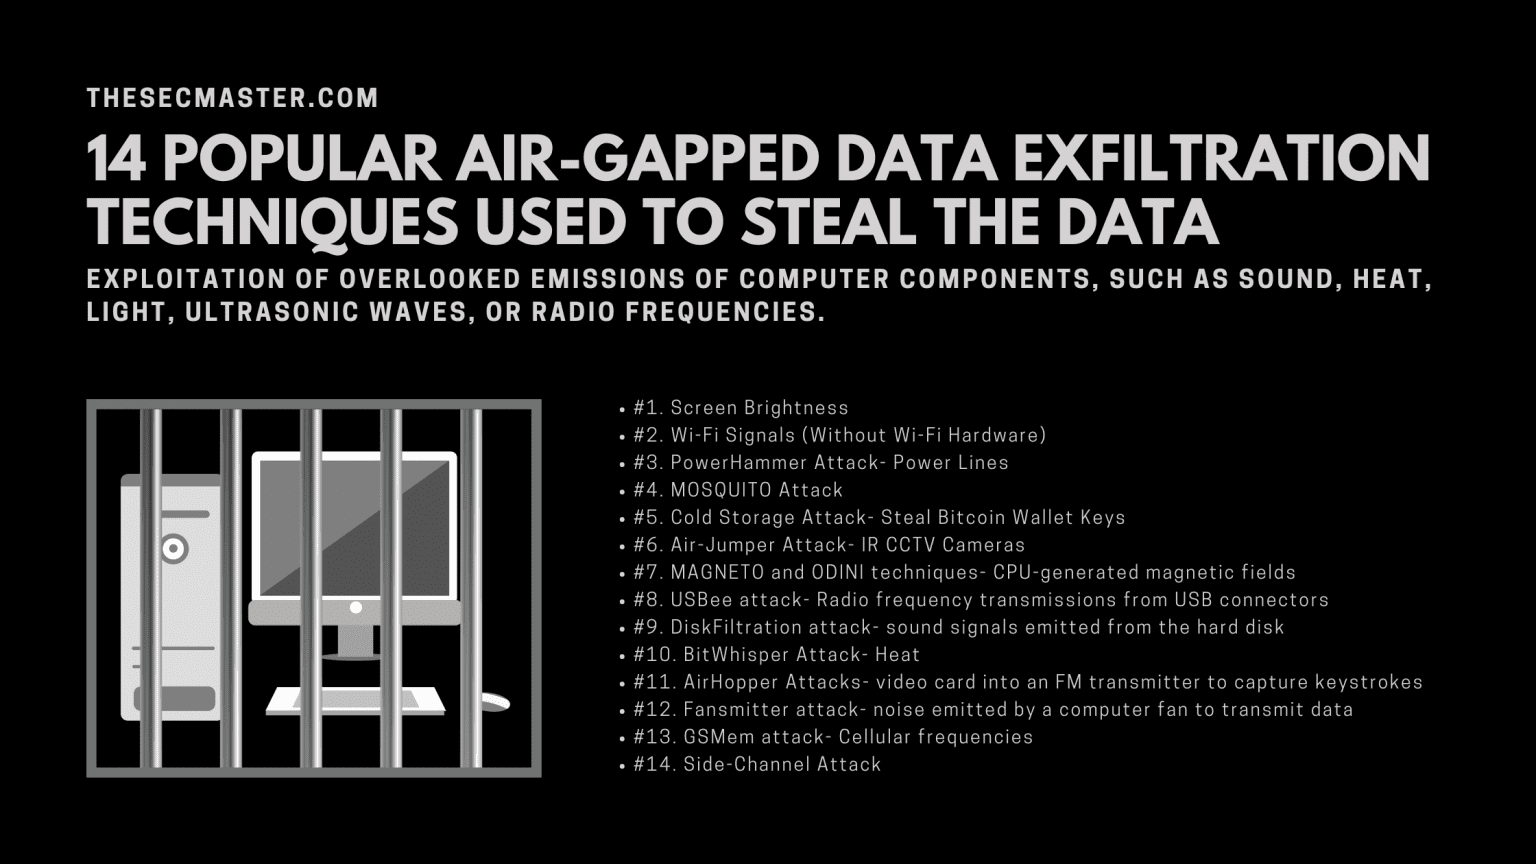 14 Popular Air-Gapped Data Exfiltration Techniques Used to Steal the Data